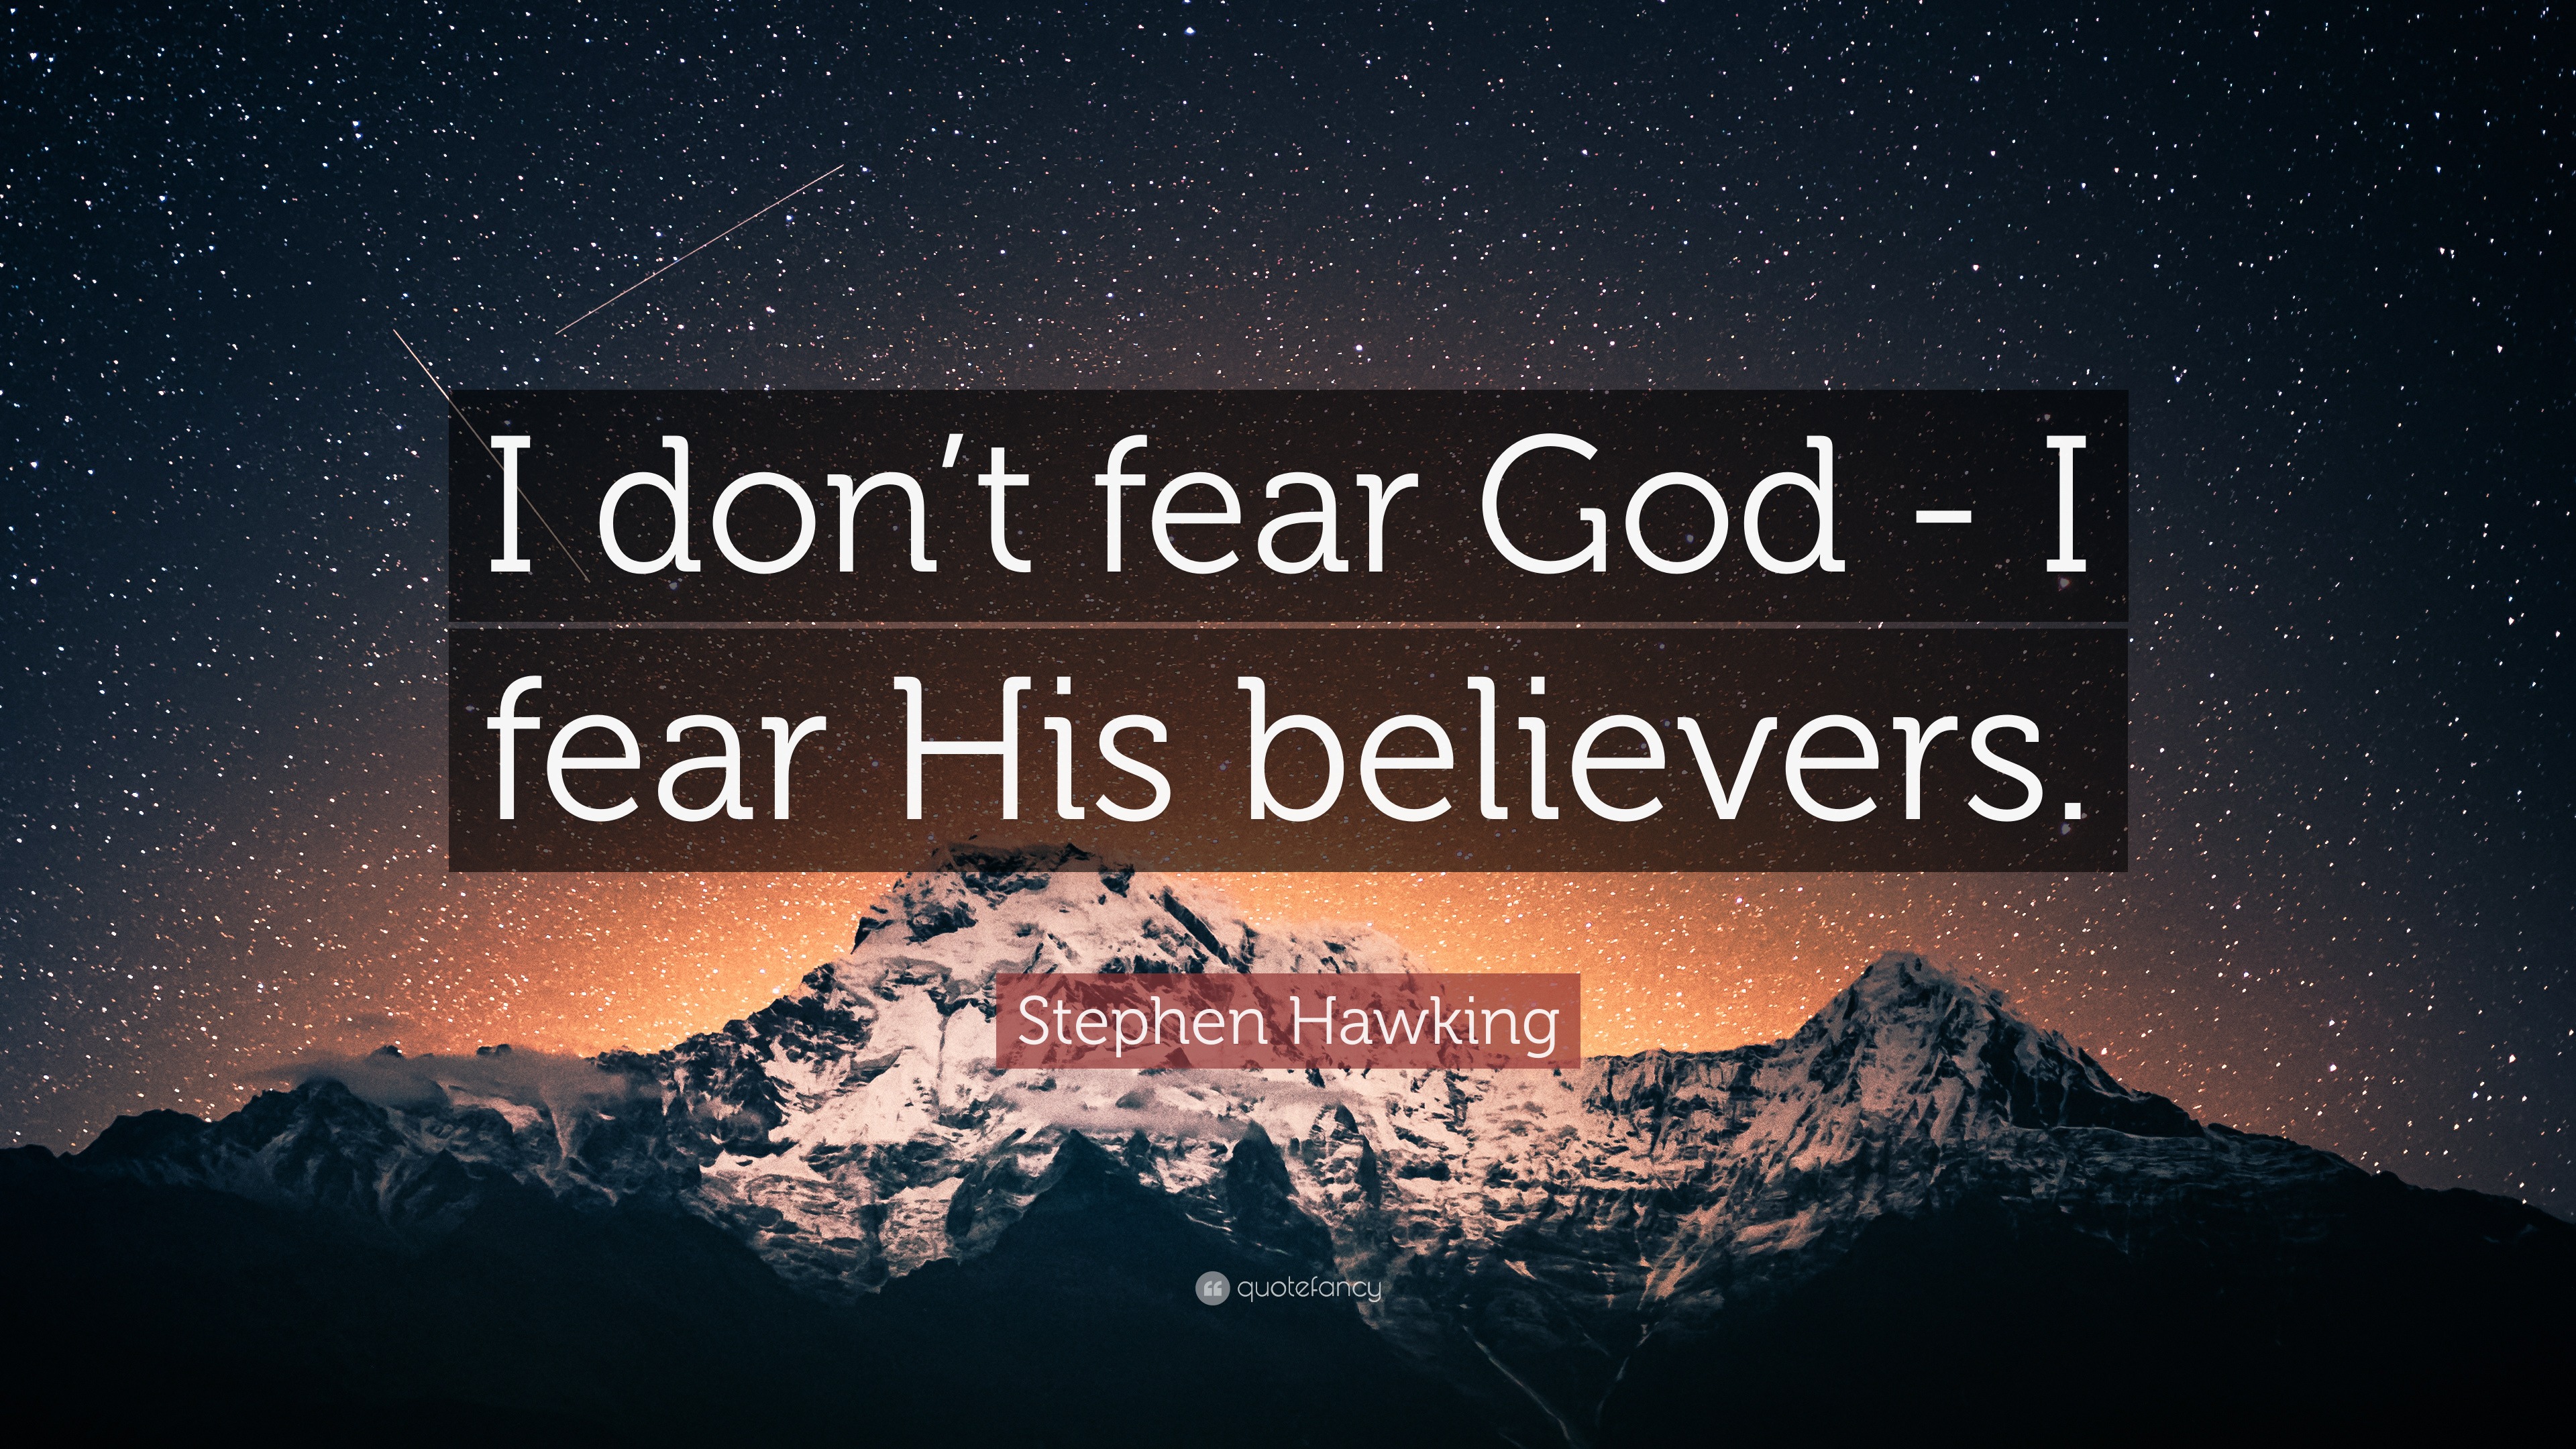 Stephen Hawking Quote: “I don't fear God - I fear His believers.”